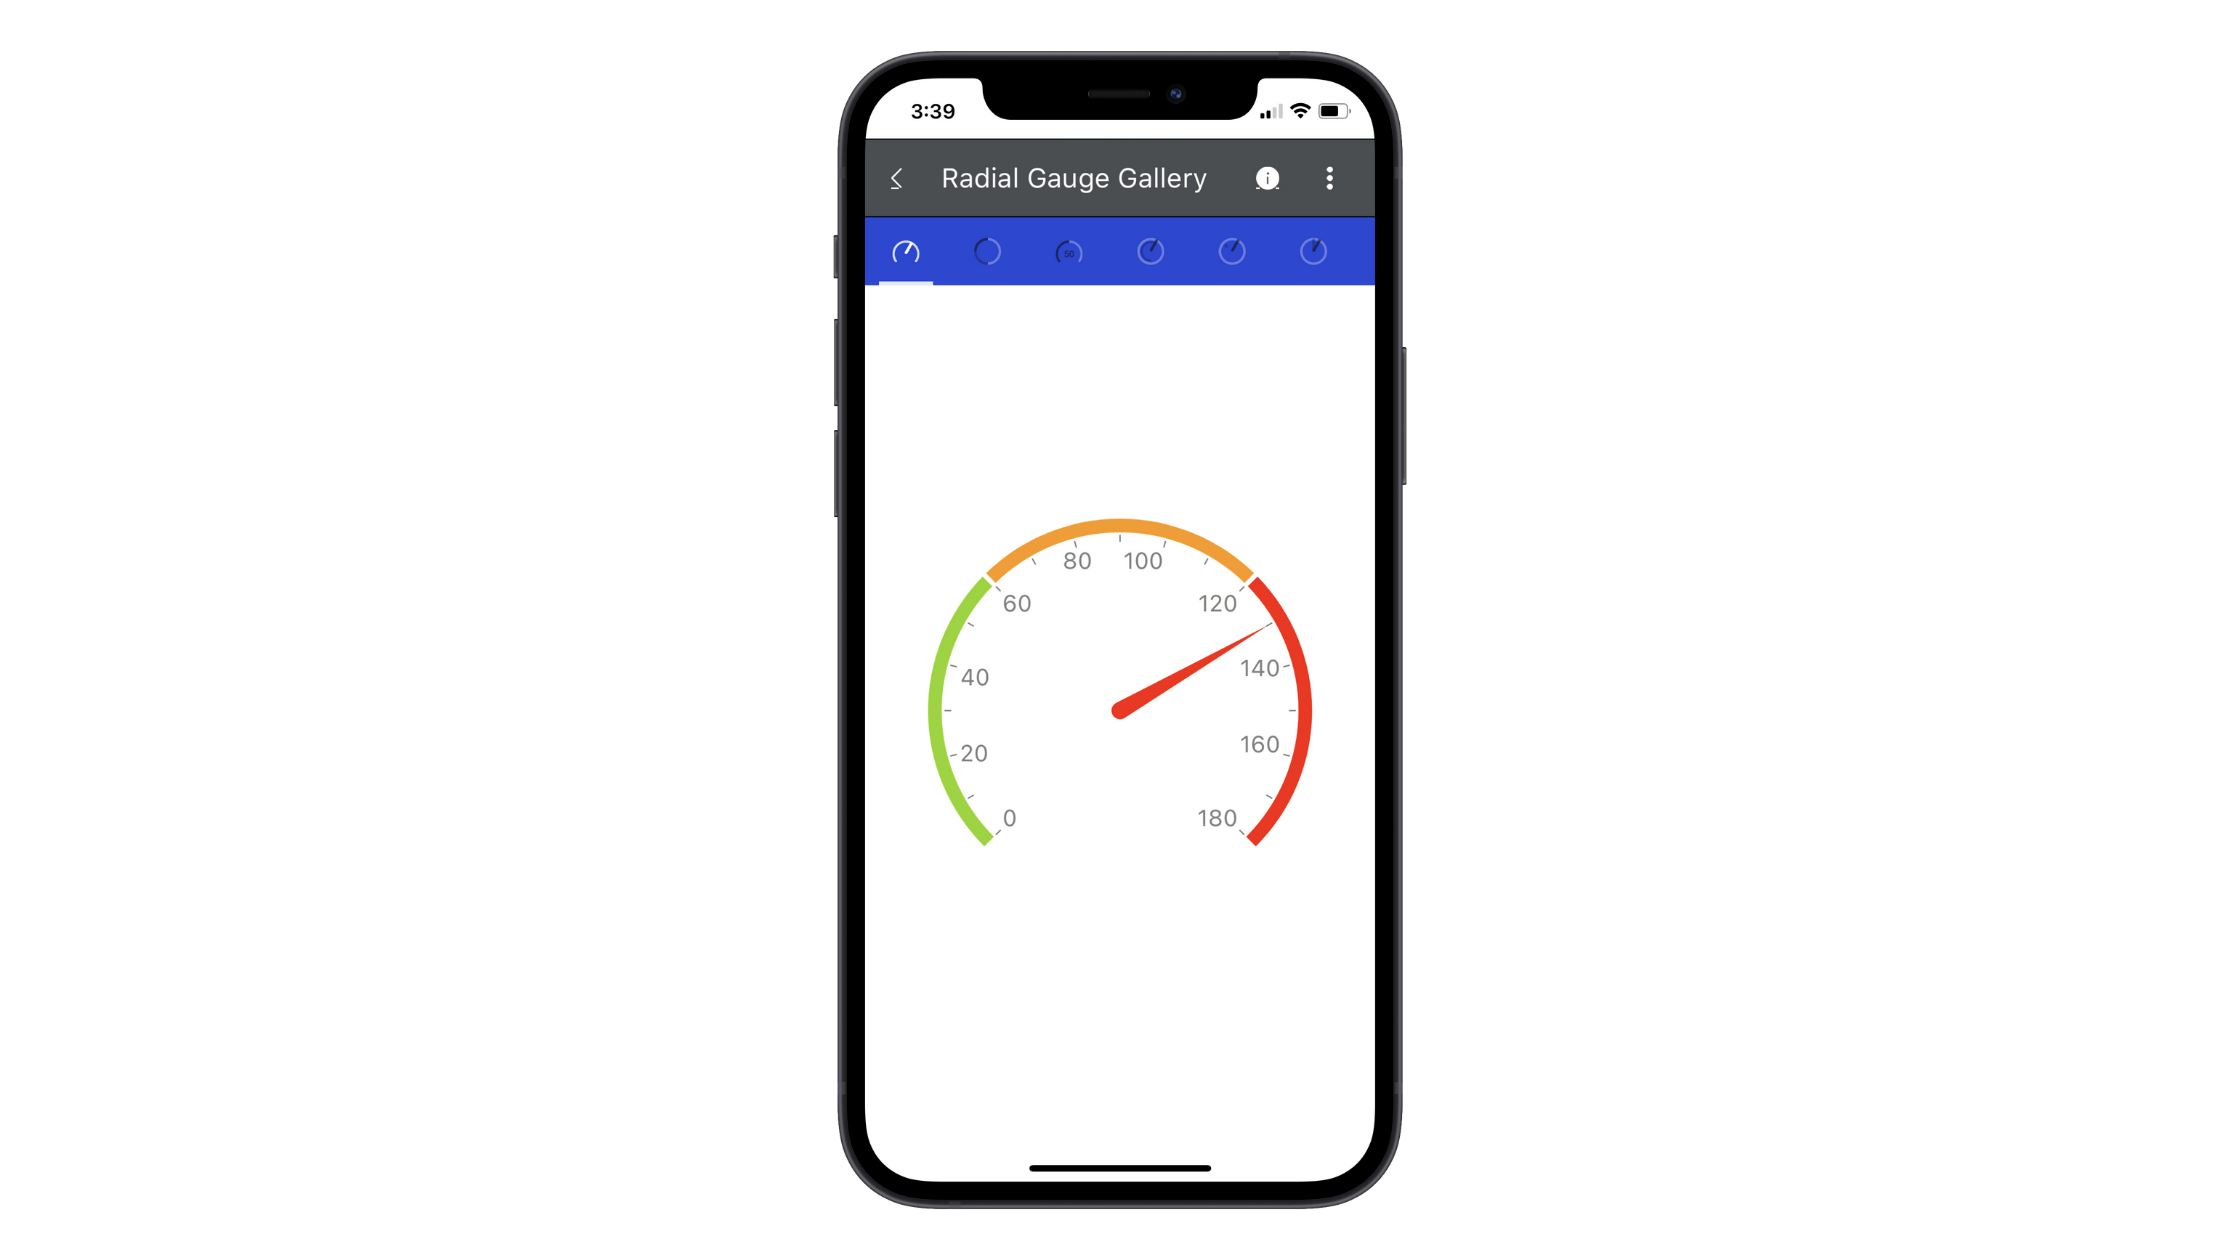 An example radial gauge component from Telerik UI for Xamarin. The gauge’s dial points to 130.